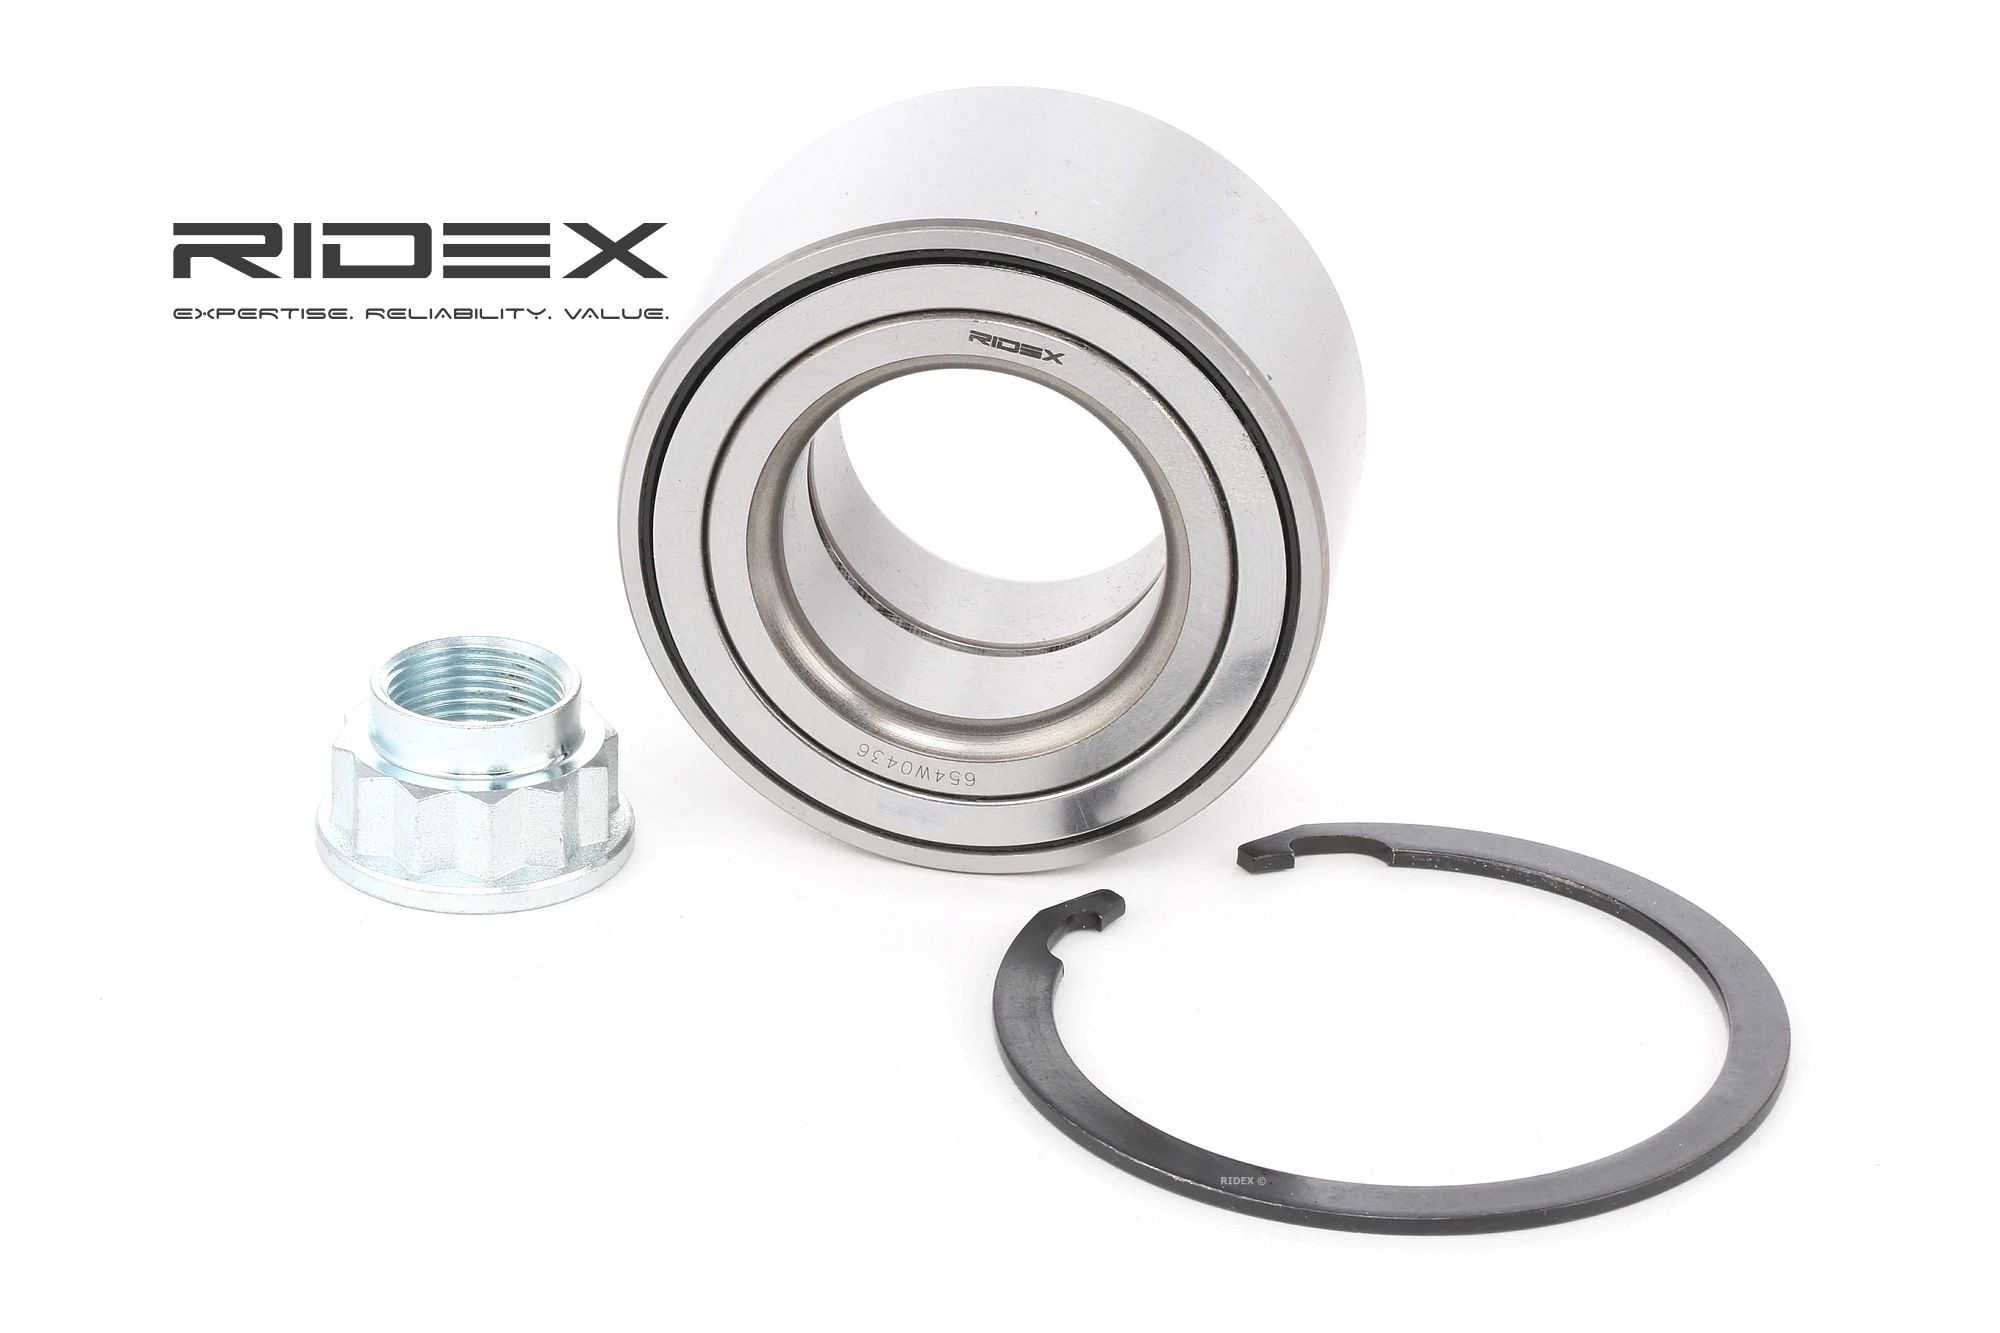 RIDEX 654W0436 Wheel bearing kit Front axle both sides, with crown nut, 84 mm